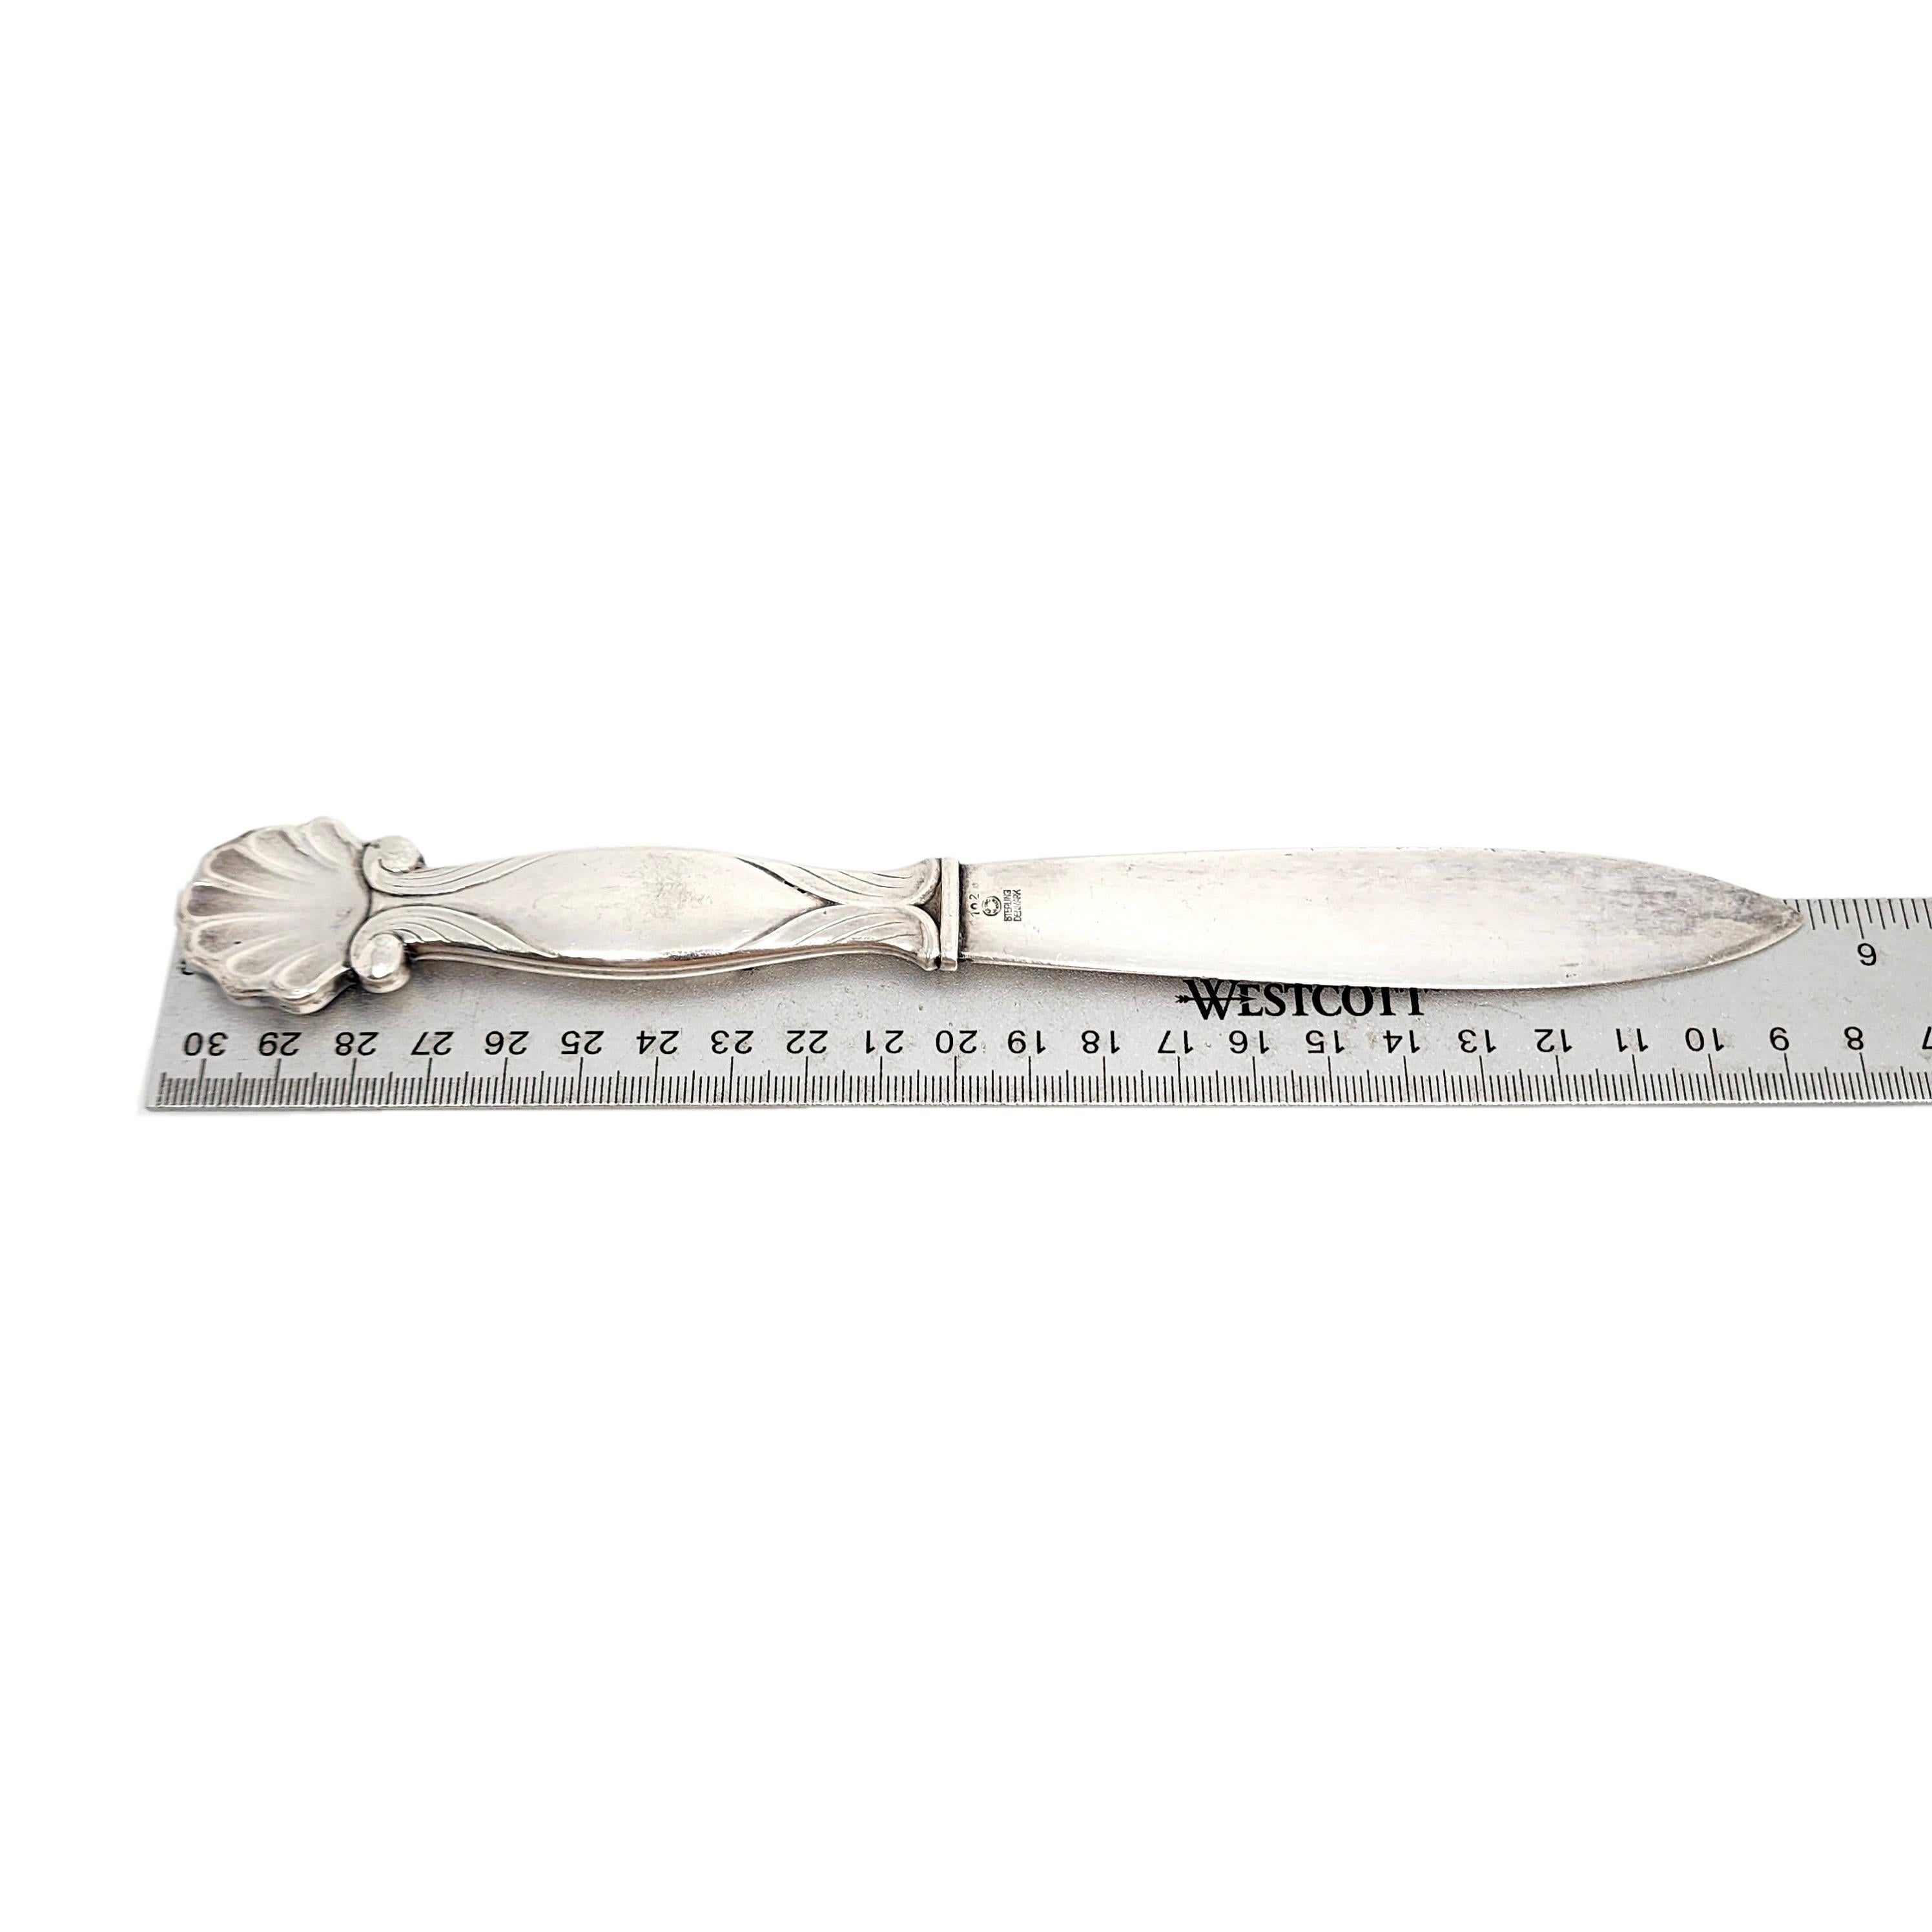 Vintage sterling silver letter opener by Georg Jensen in the Ornamental Shell #102 pattern, circa 1930s.

No monogram

Shell design a top the handle with scroll accents. The hallmark dates the piece circa 1930s.

Measures approx 9